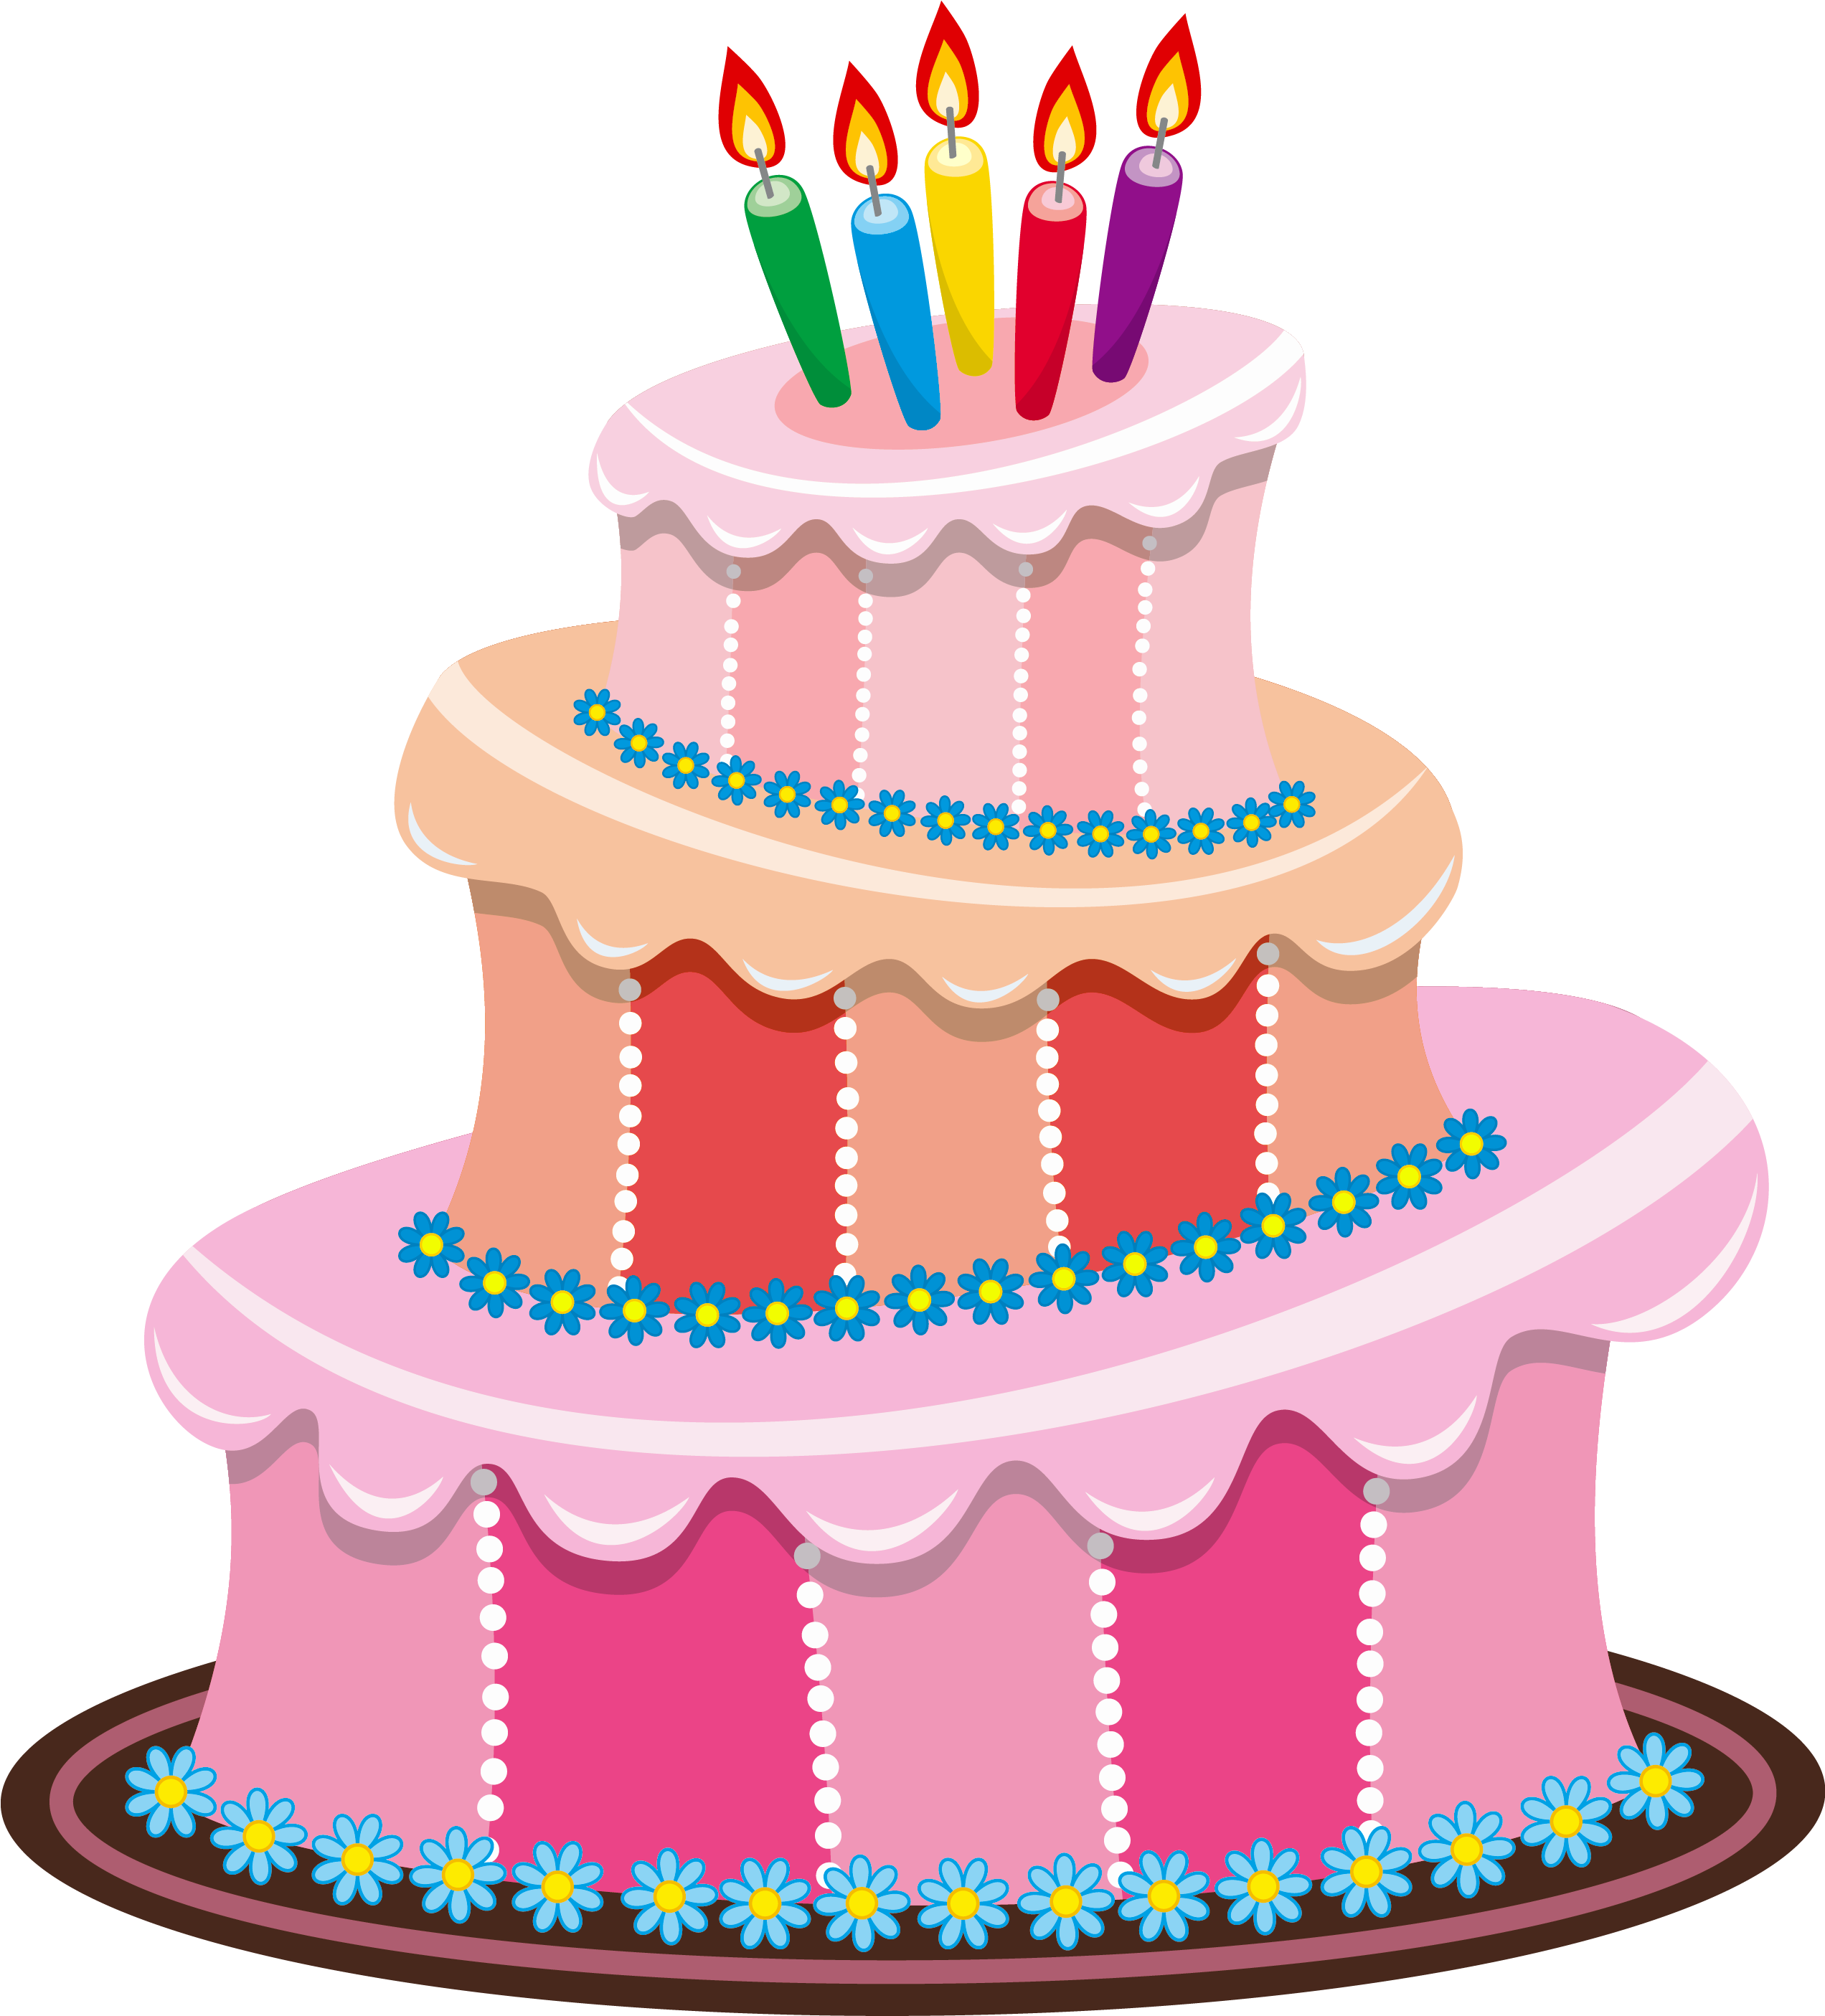 Birthday Cake Images Download - Birthday Cake Clip Art Png (2627x2846)